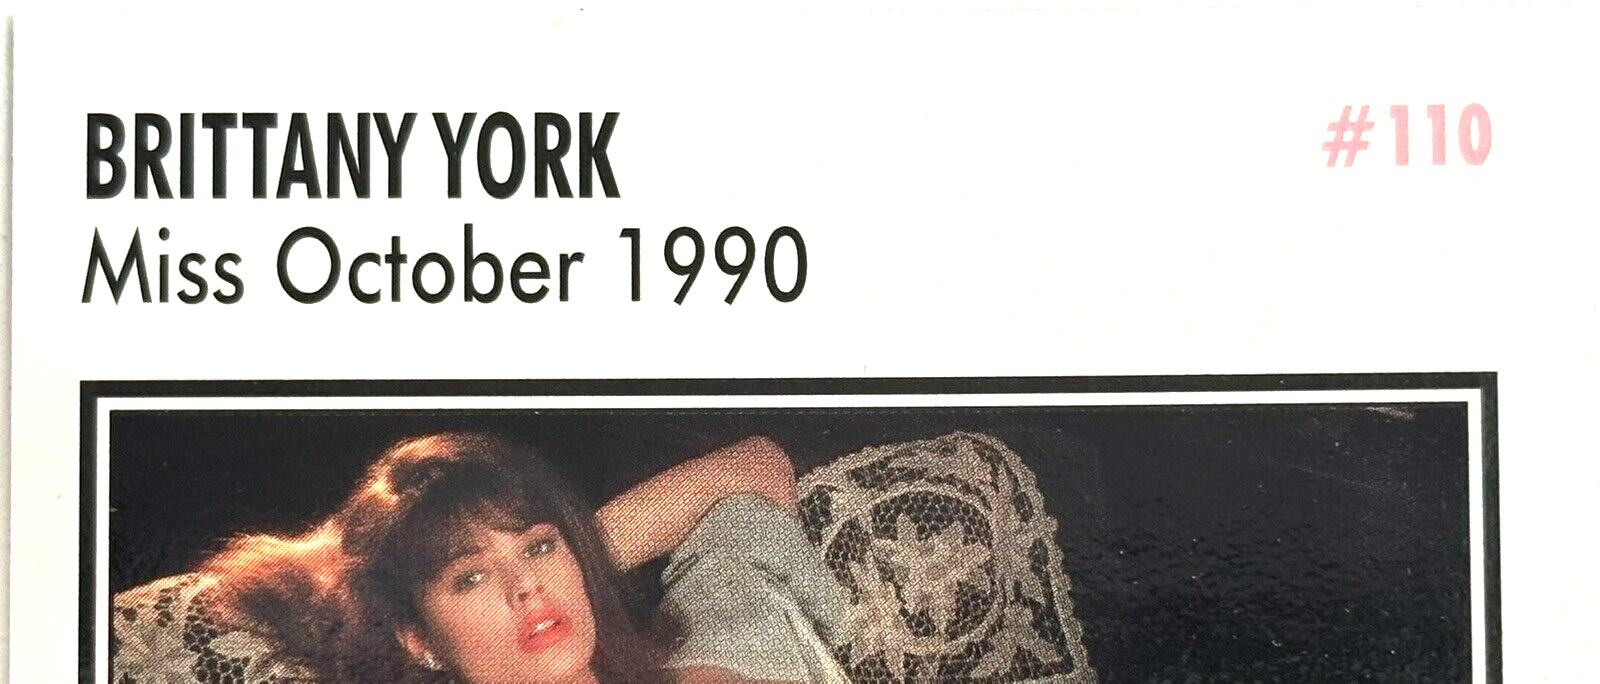 1997 Playboy Card ~ BRITTANY YORK Auto/Signed ~ MISS OCTOBER 1990